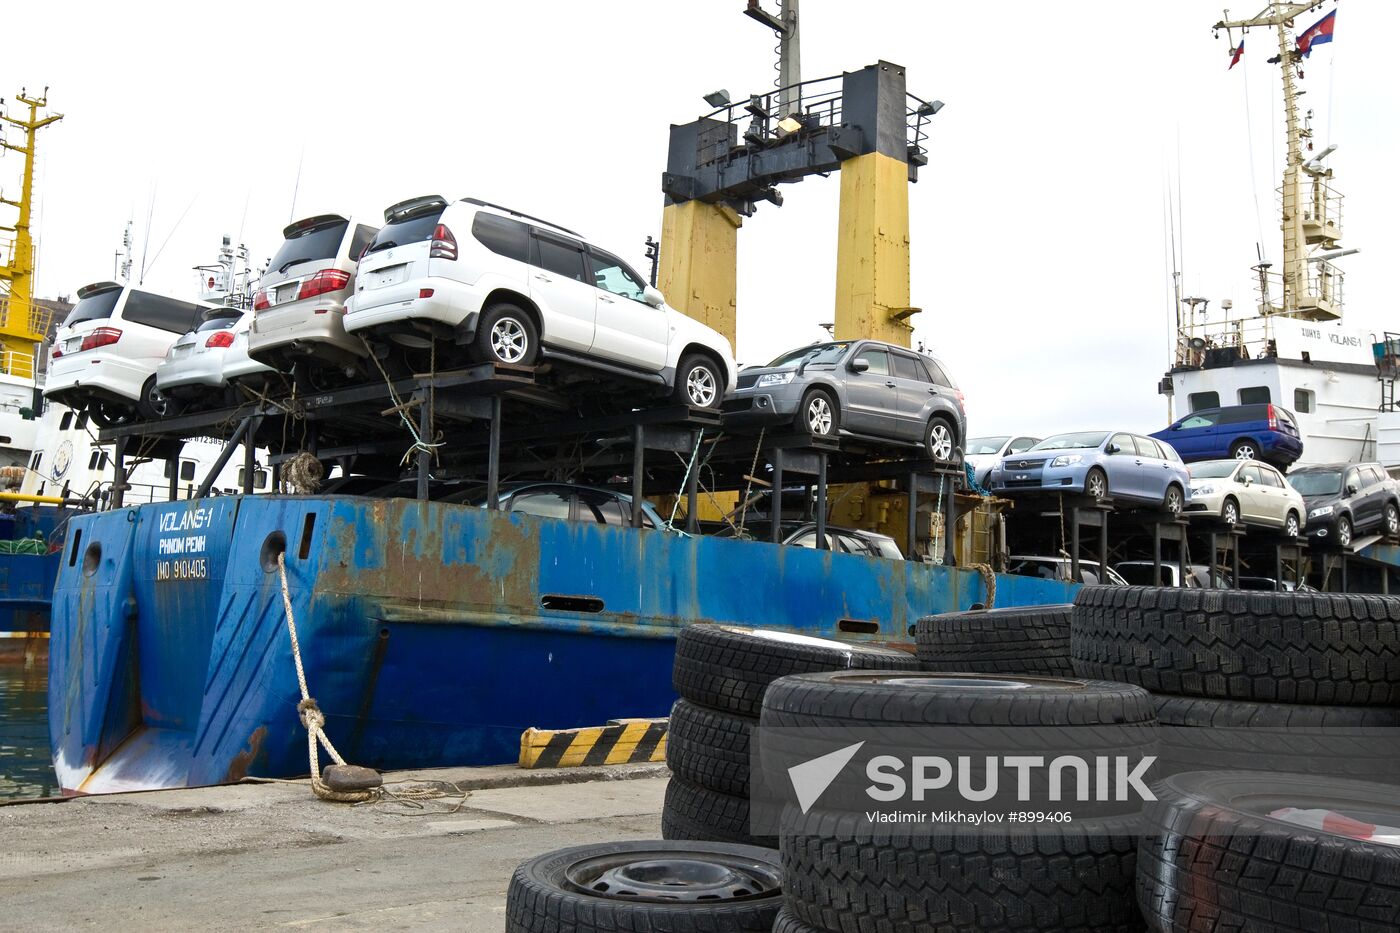 Cars imported from Japan checked for radiation